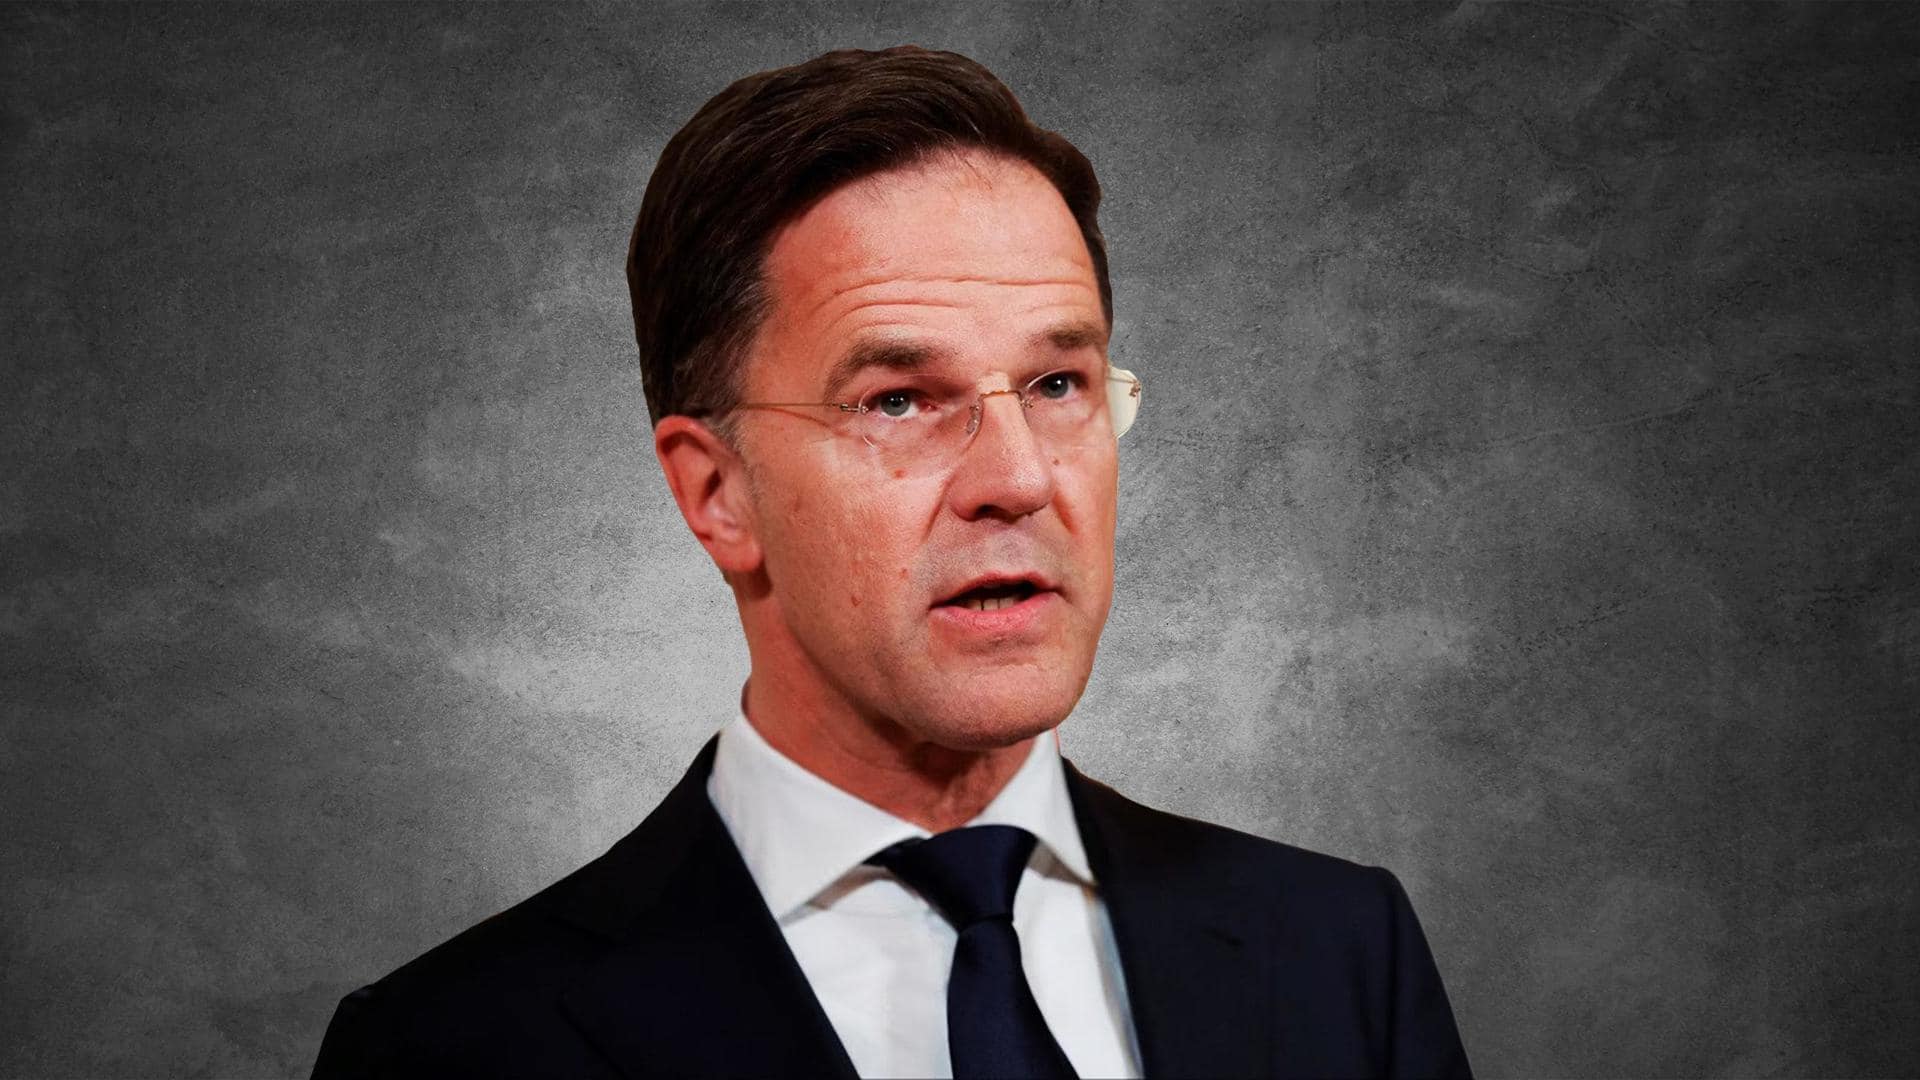 Netherlands: Government collapses following dispute over immigration policy